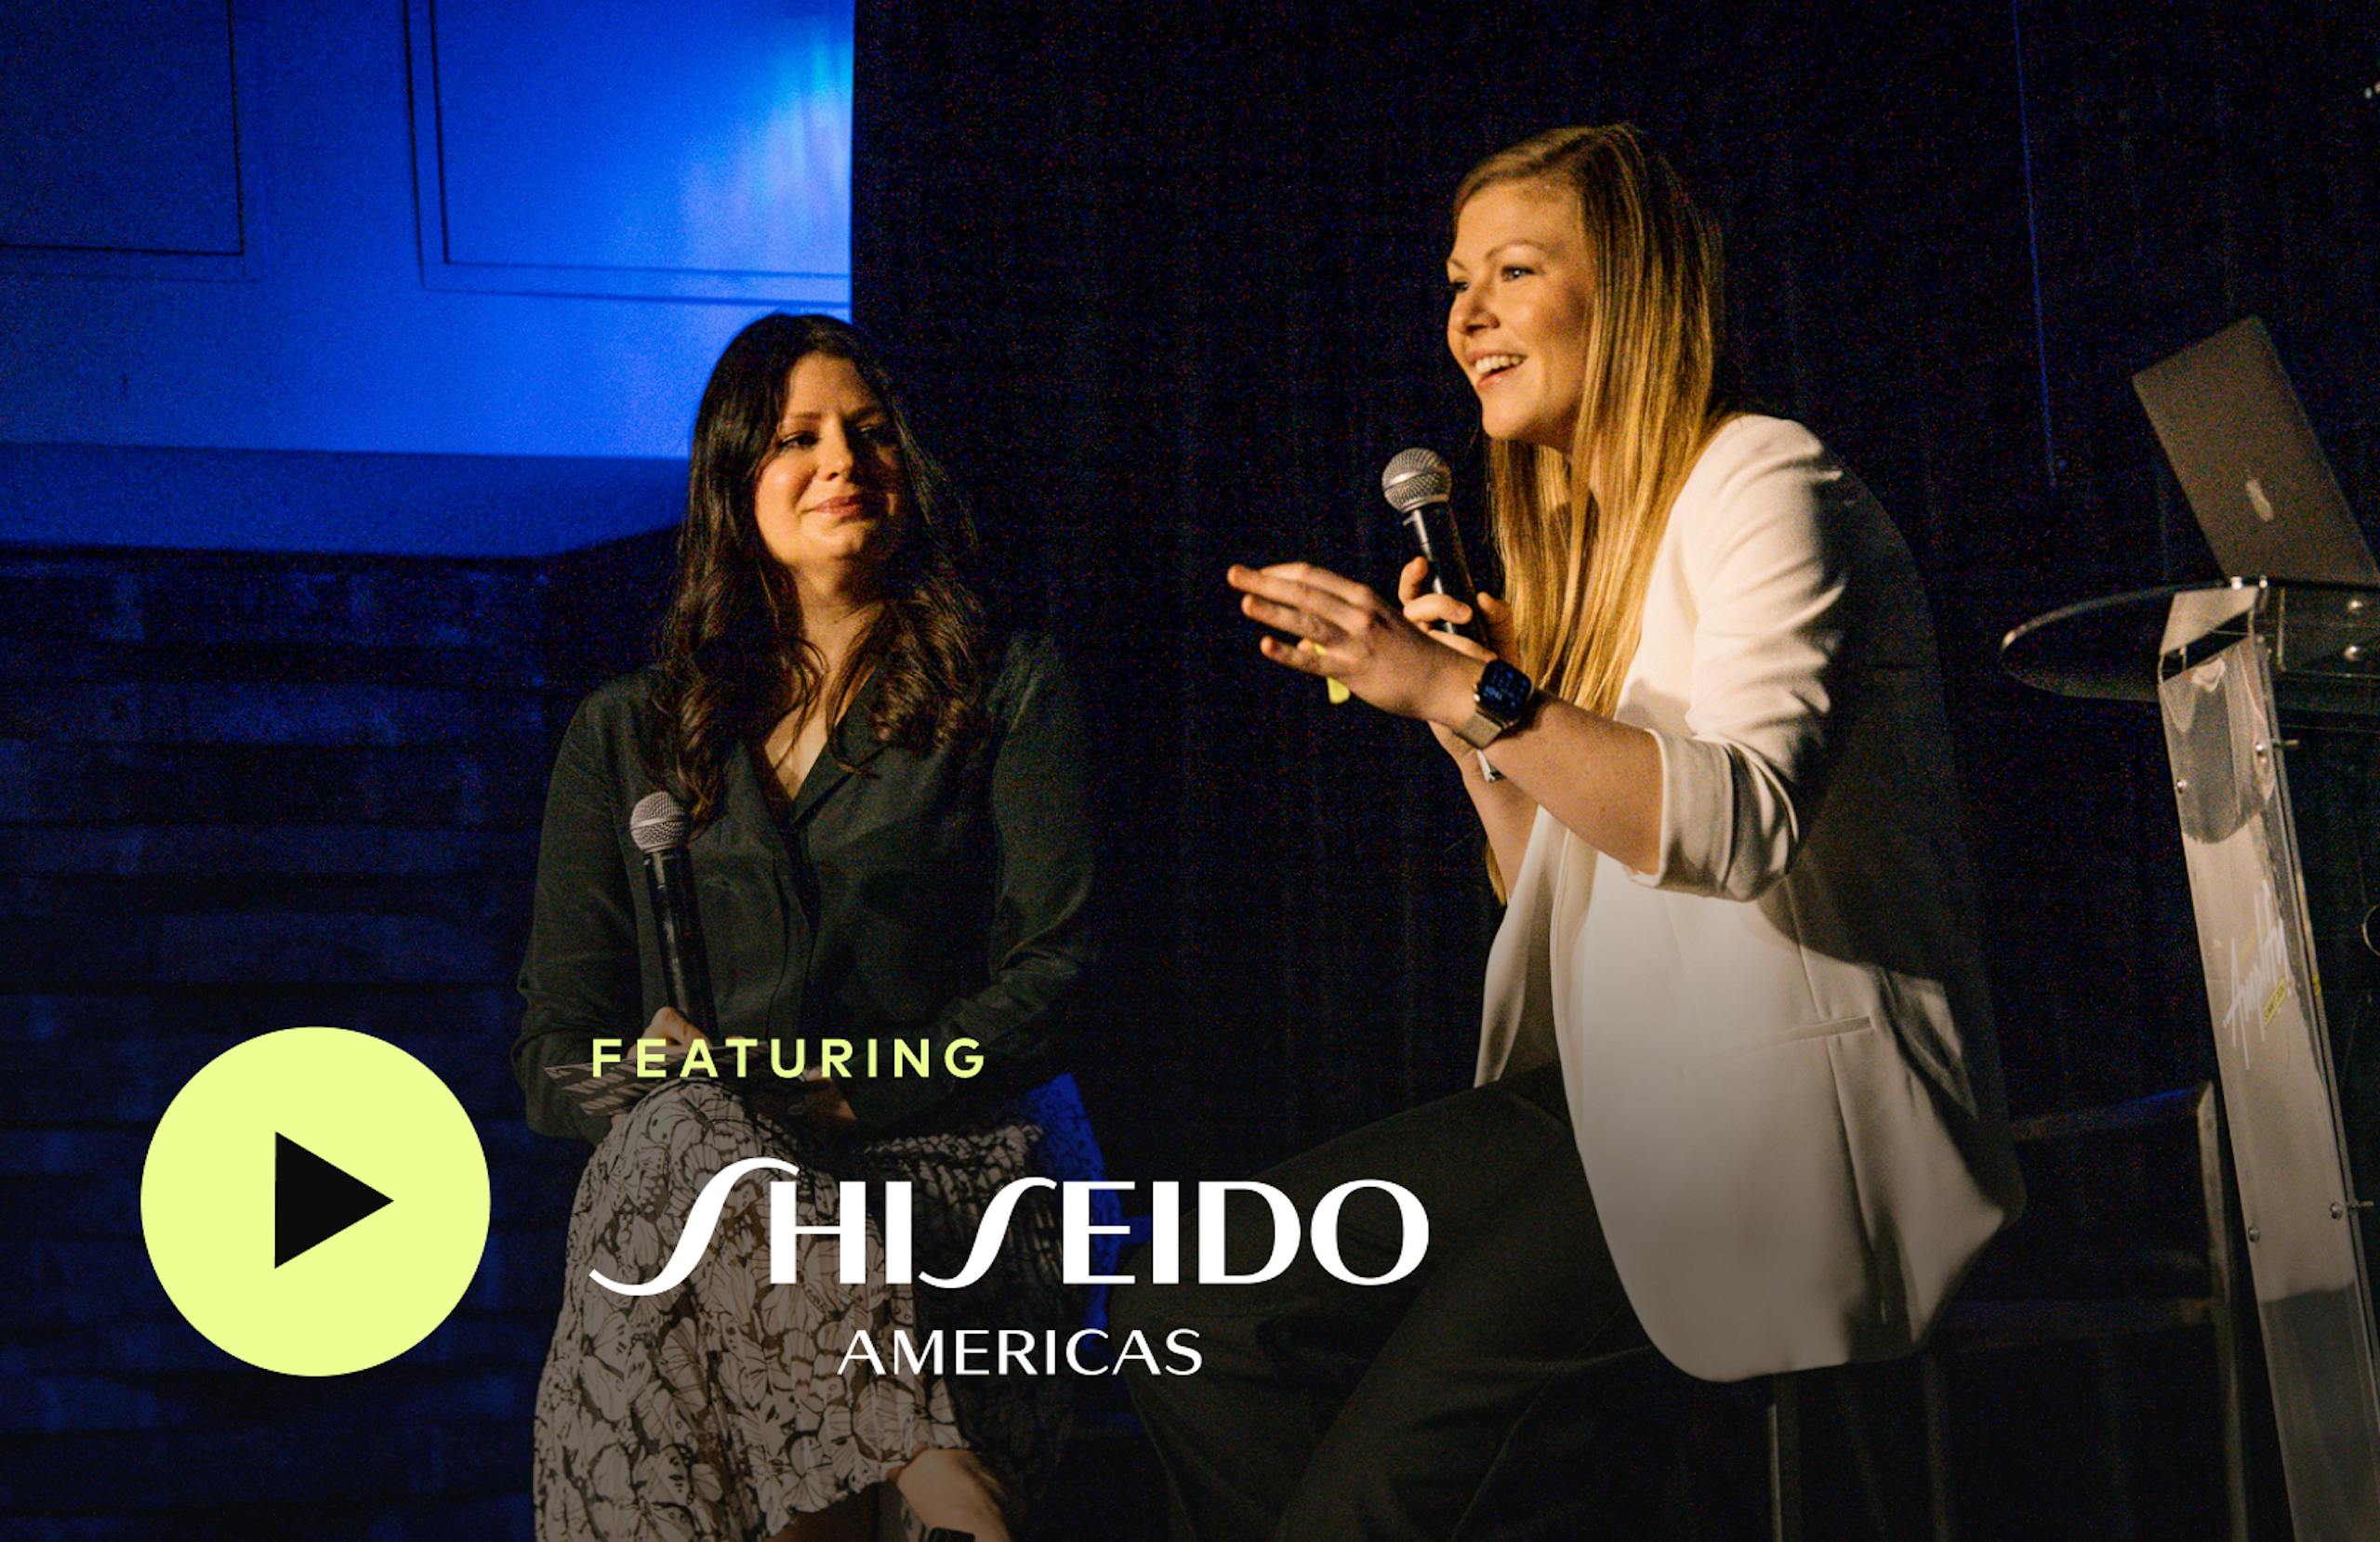 Valerie from Shiseido and Sara from Amperity onstage speaking. Featuring Shiseido Americas.